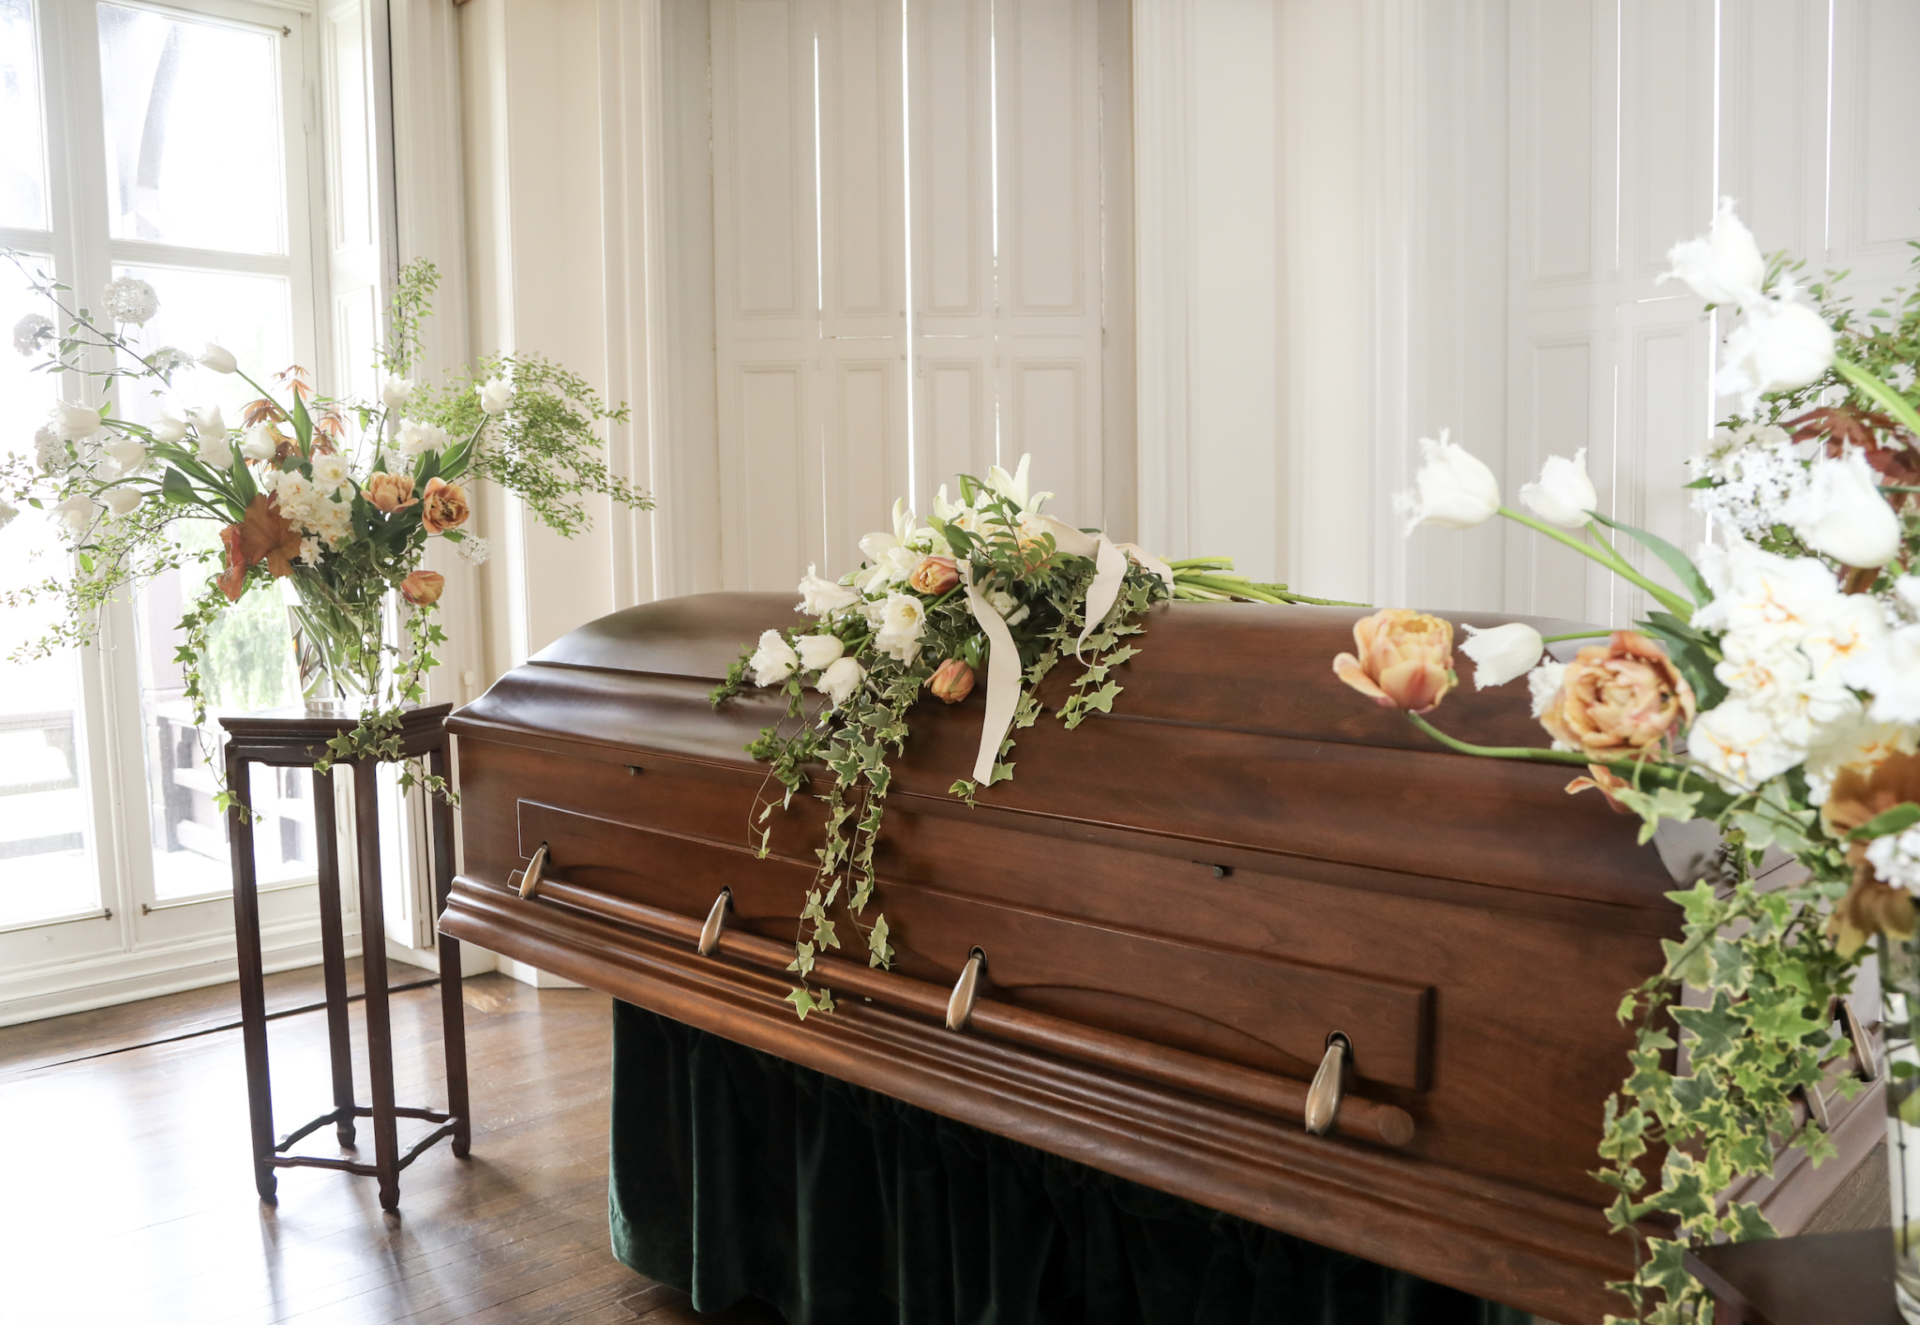 3 Benefits of Holding a Funeral Service for a Deceased Family Member